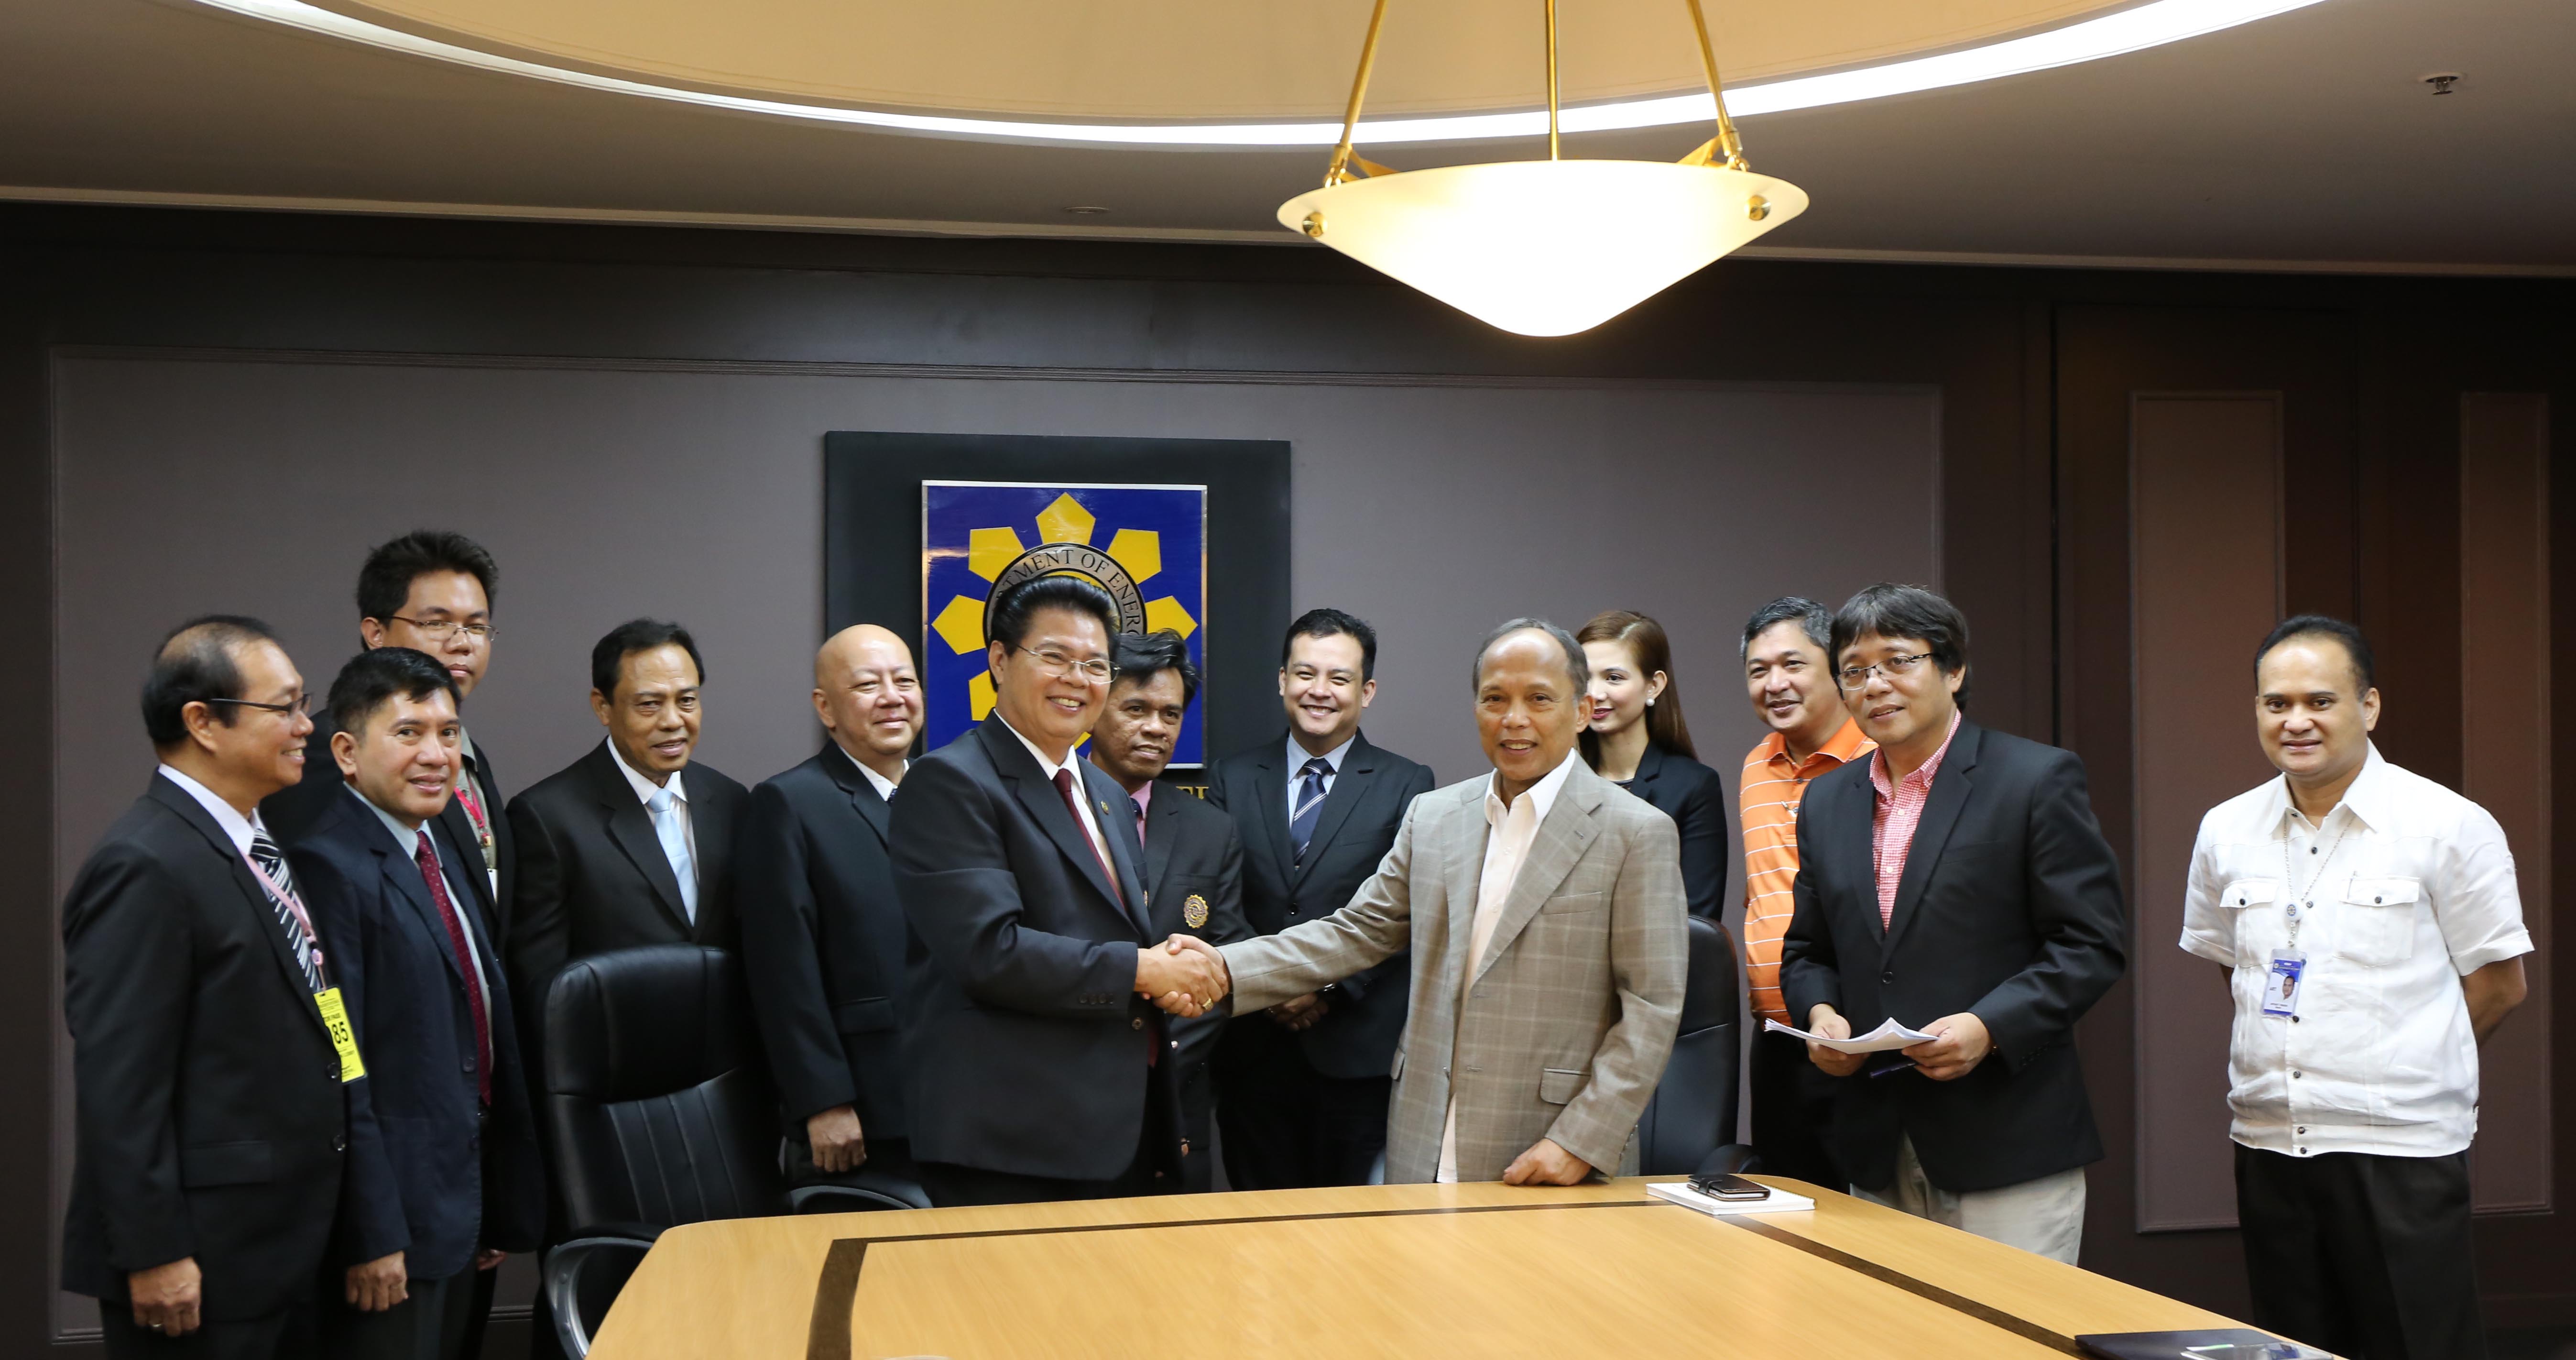 The DOE and the Philippine Society of Mechanical Engineers signed a Memorandum of Agreement for the technical audit of the country’s generation, transmission and distribution facilities.